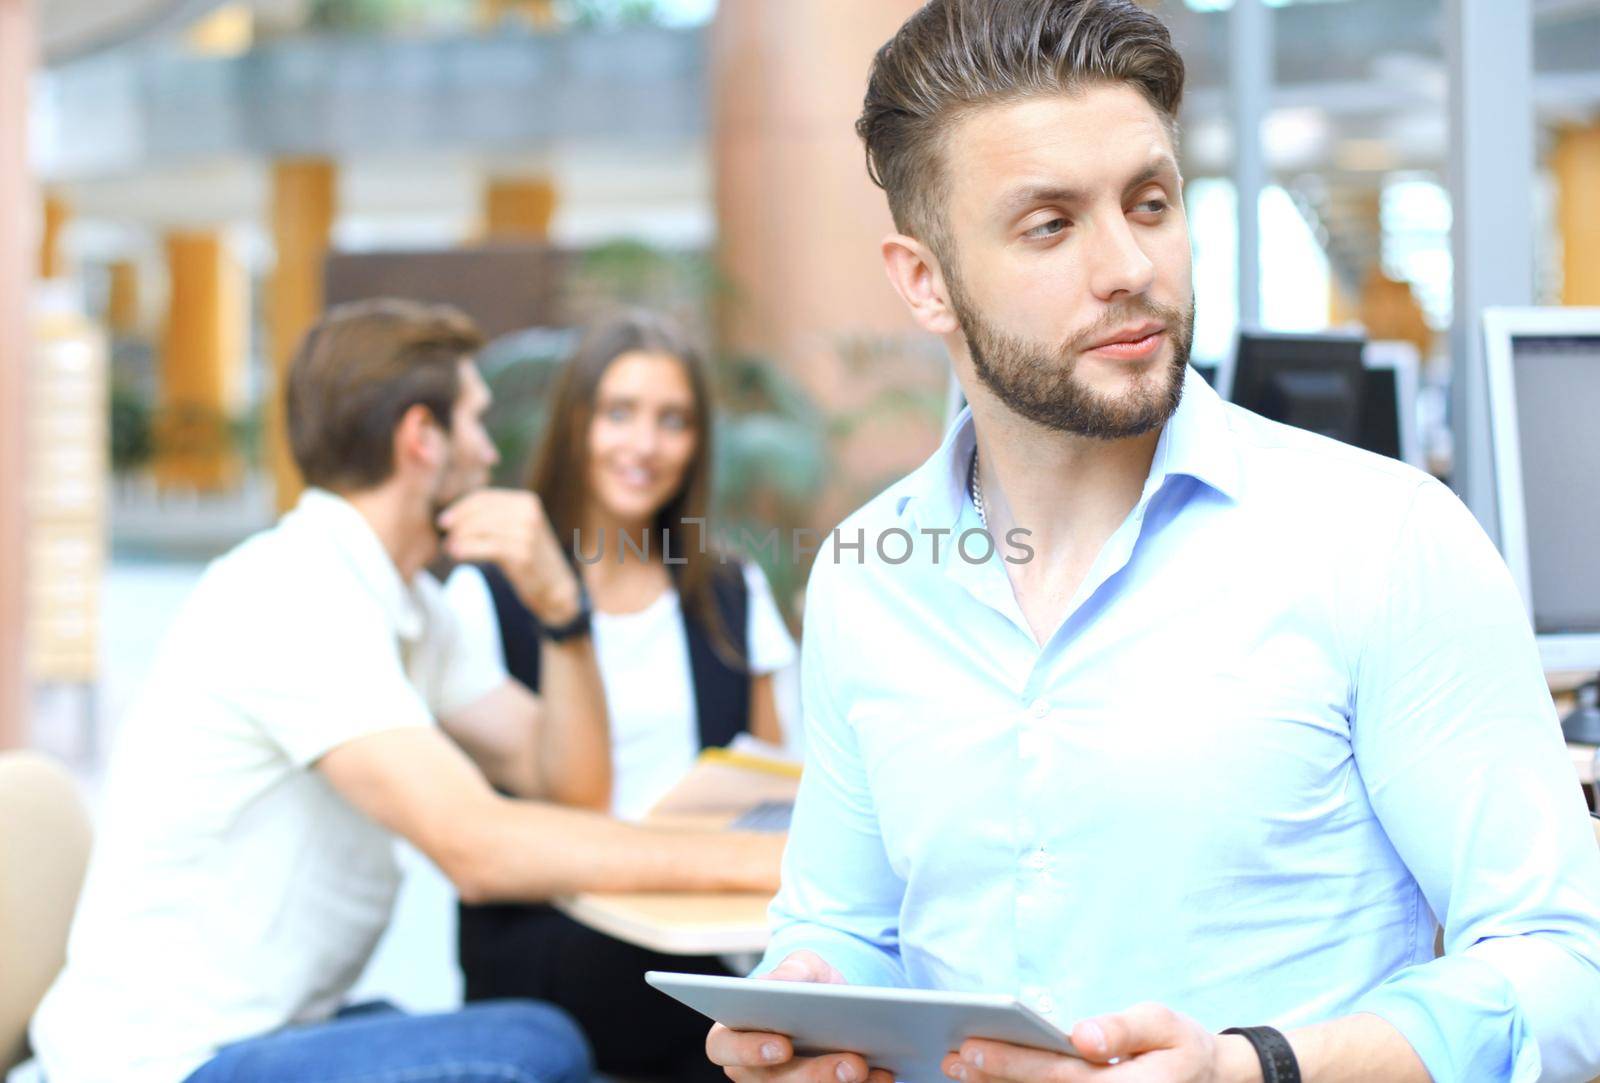 Young man holding digital tablet while his colleagues working in the background.